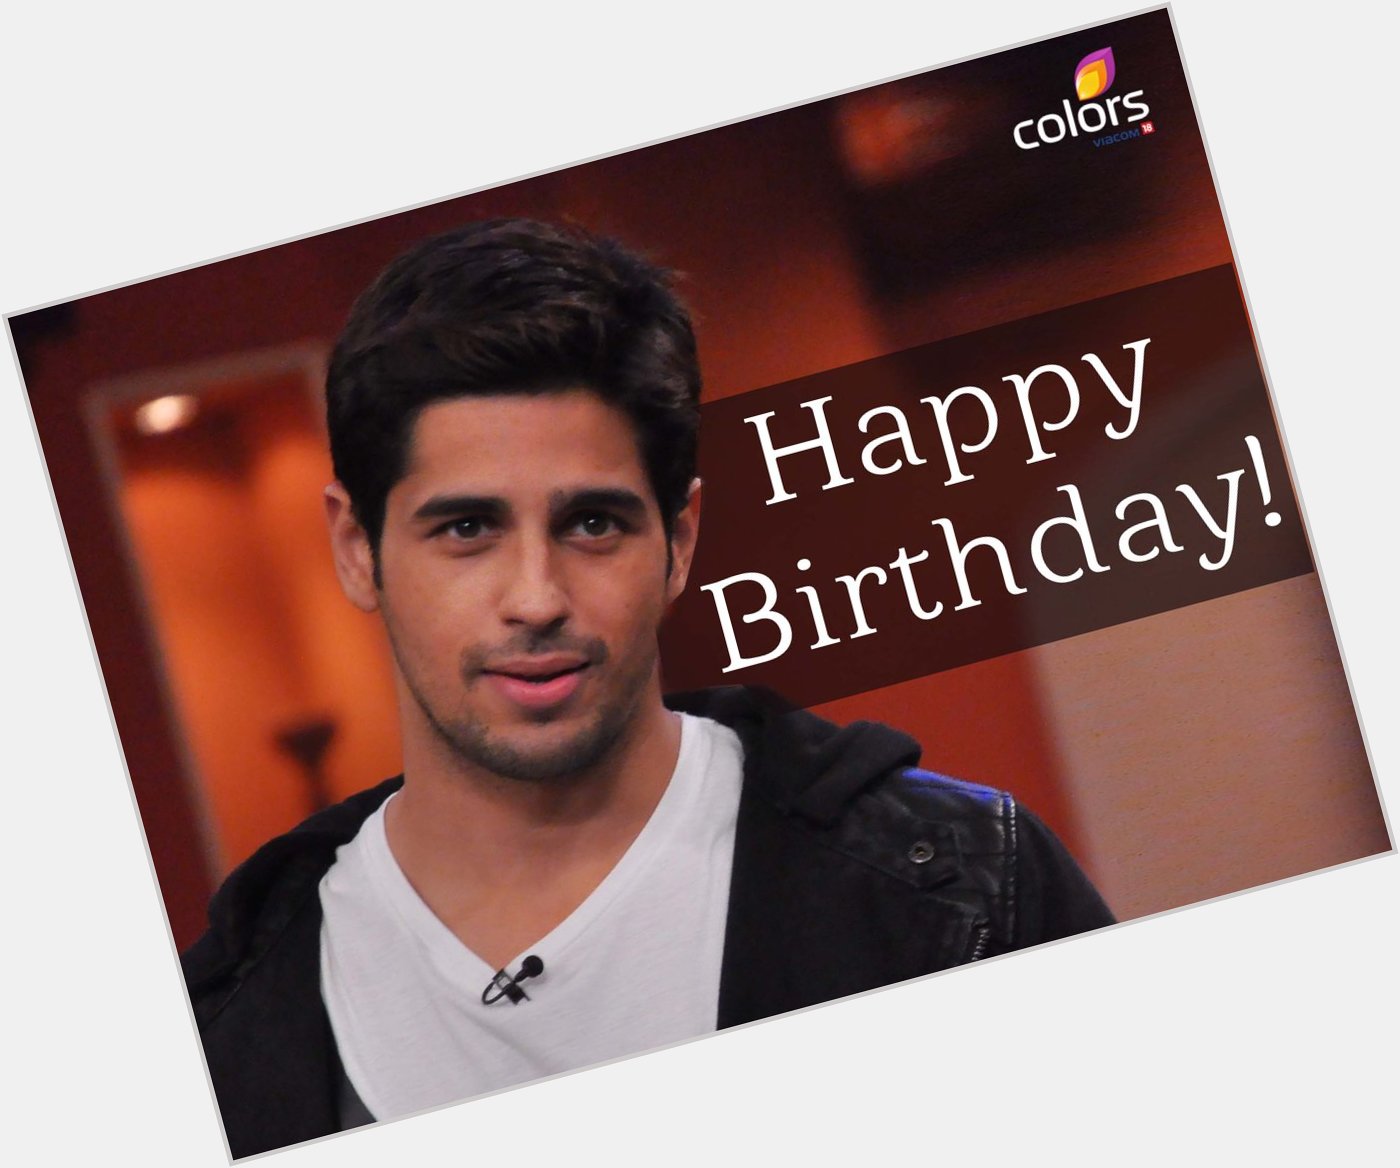 Happy Birthday Sidharth Malhotra!

message your wishes for him! 